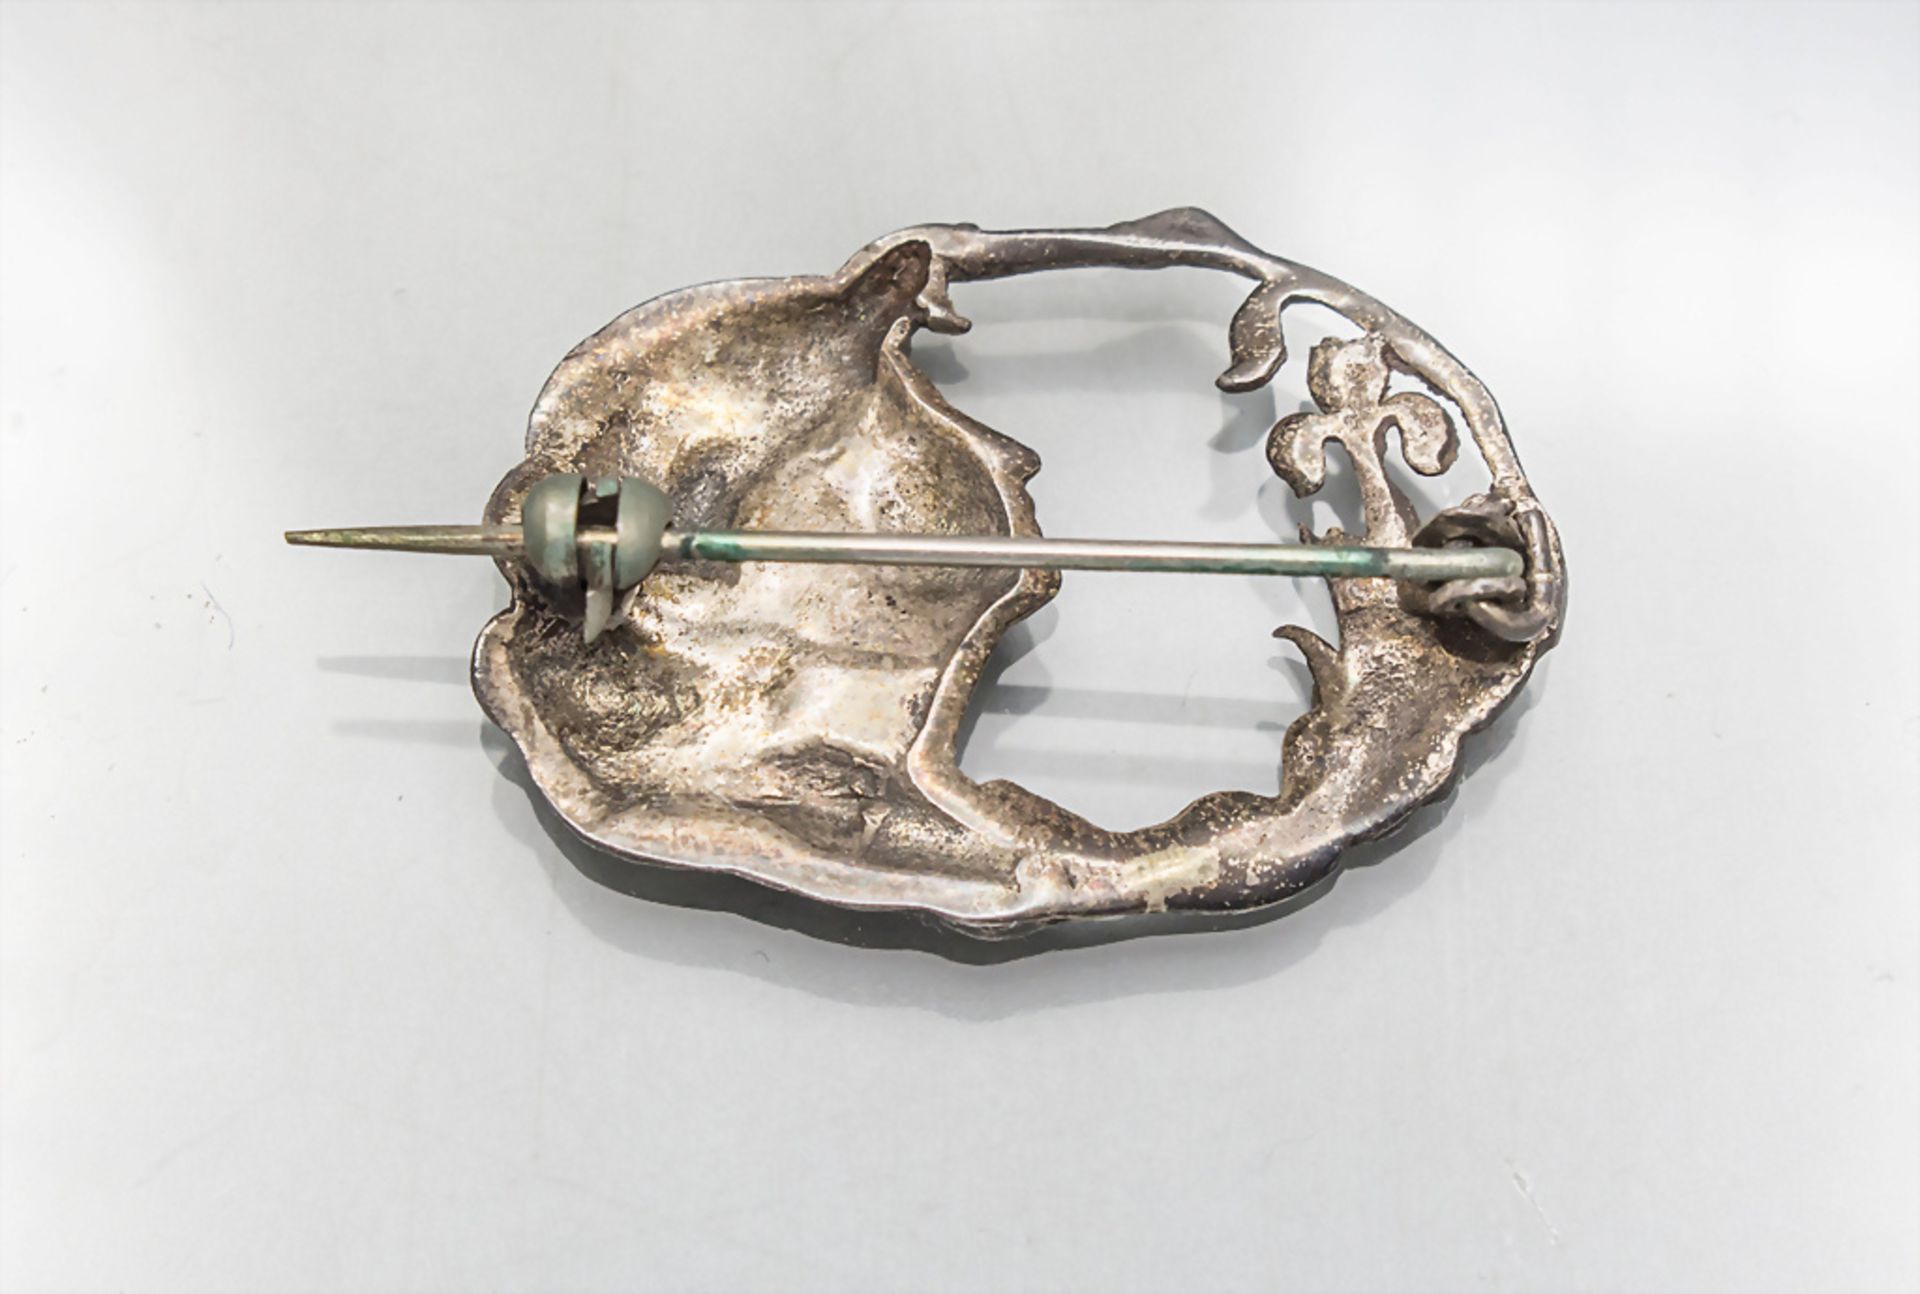 Jugendstil Brosche mit junger Frau und Lilie / An Art Nouveau brooch with a young woman and a ... - Image 2 of 2